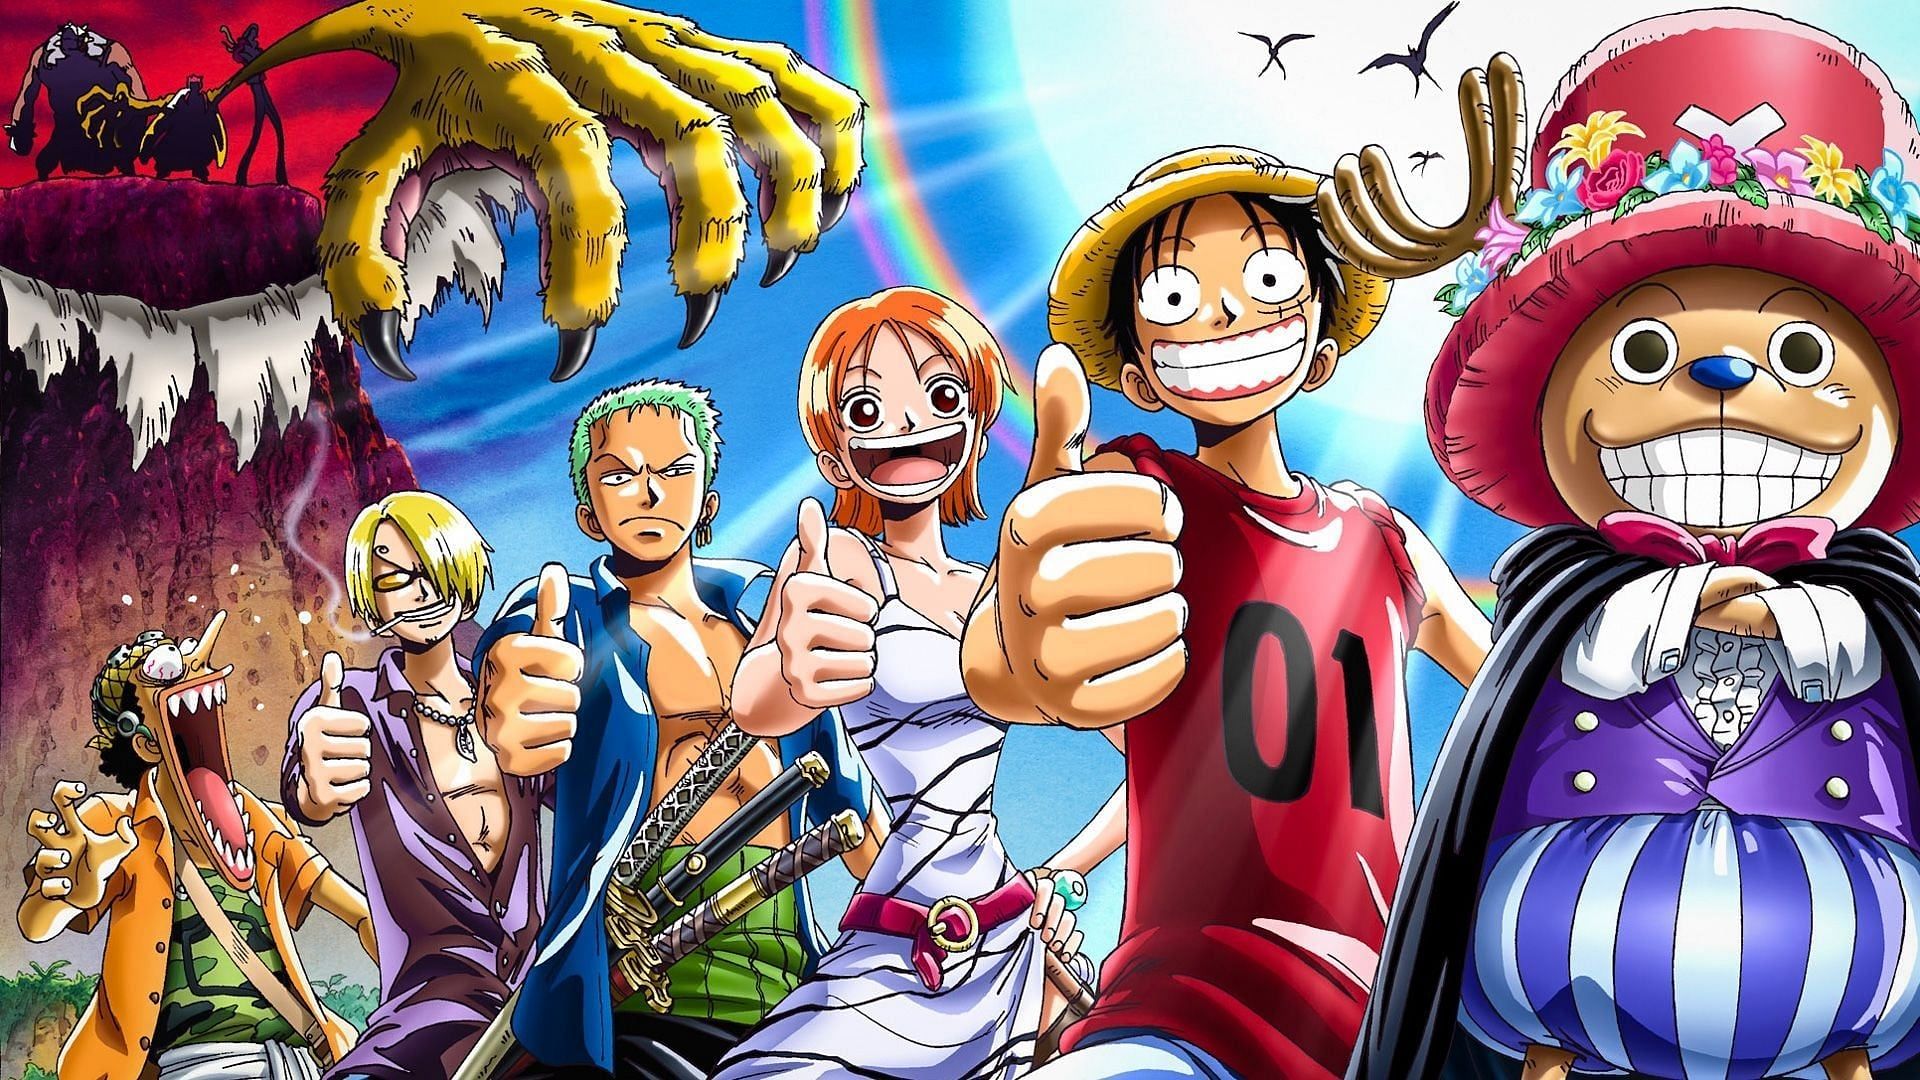 Best One Piece Movies, Ranked